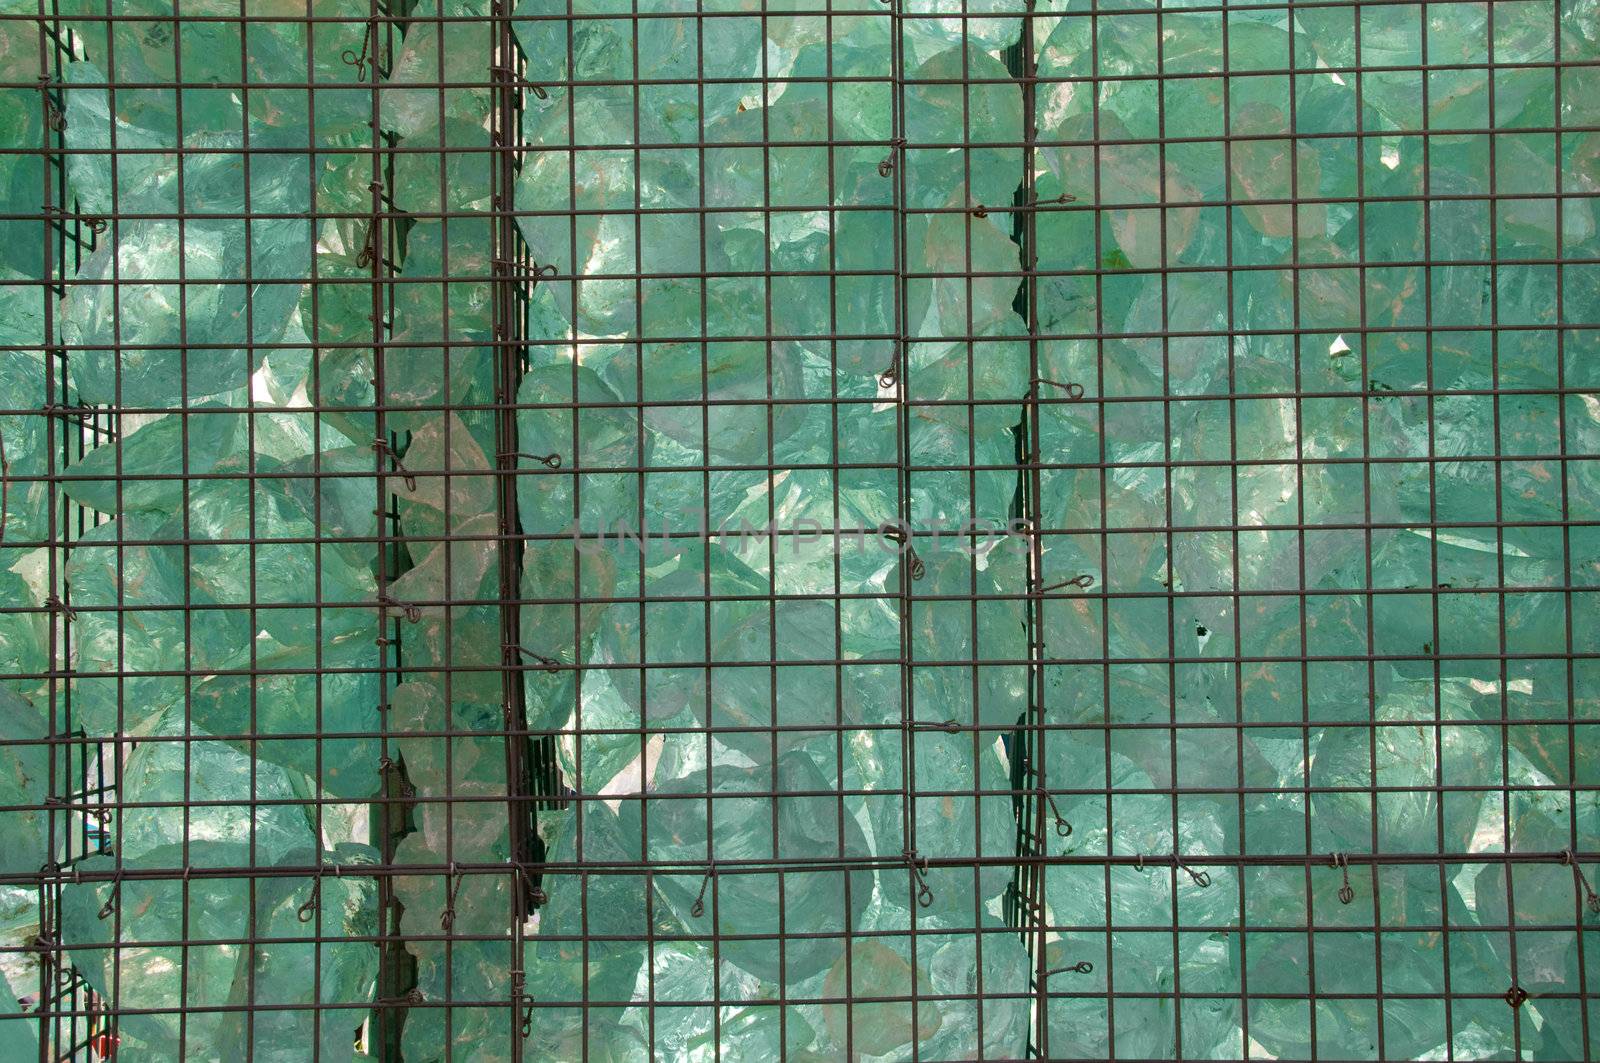 A pile of decorative pieces of glass, enclosed in a metal grate.